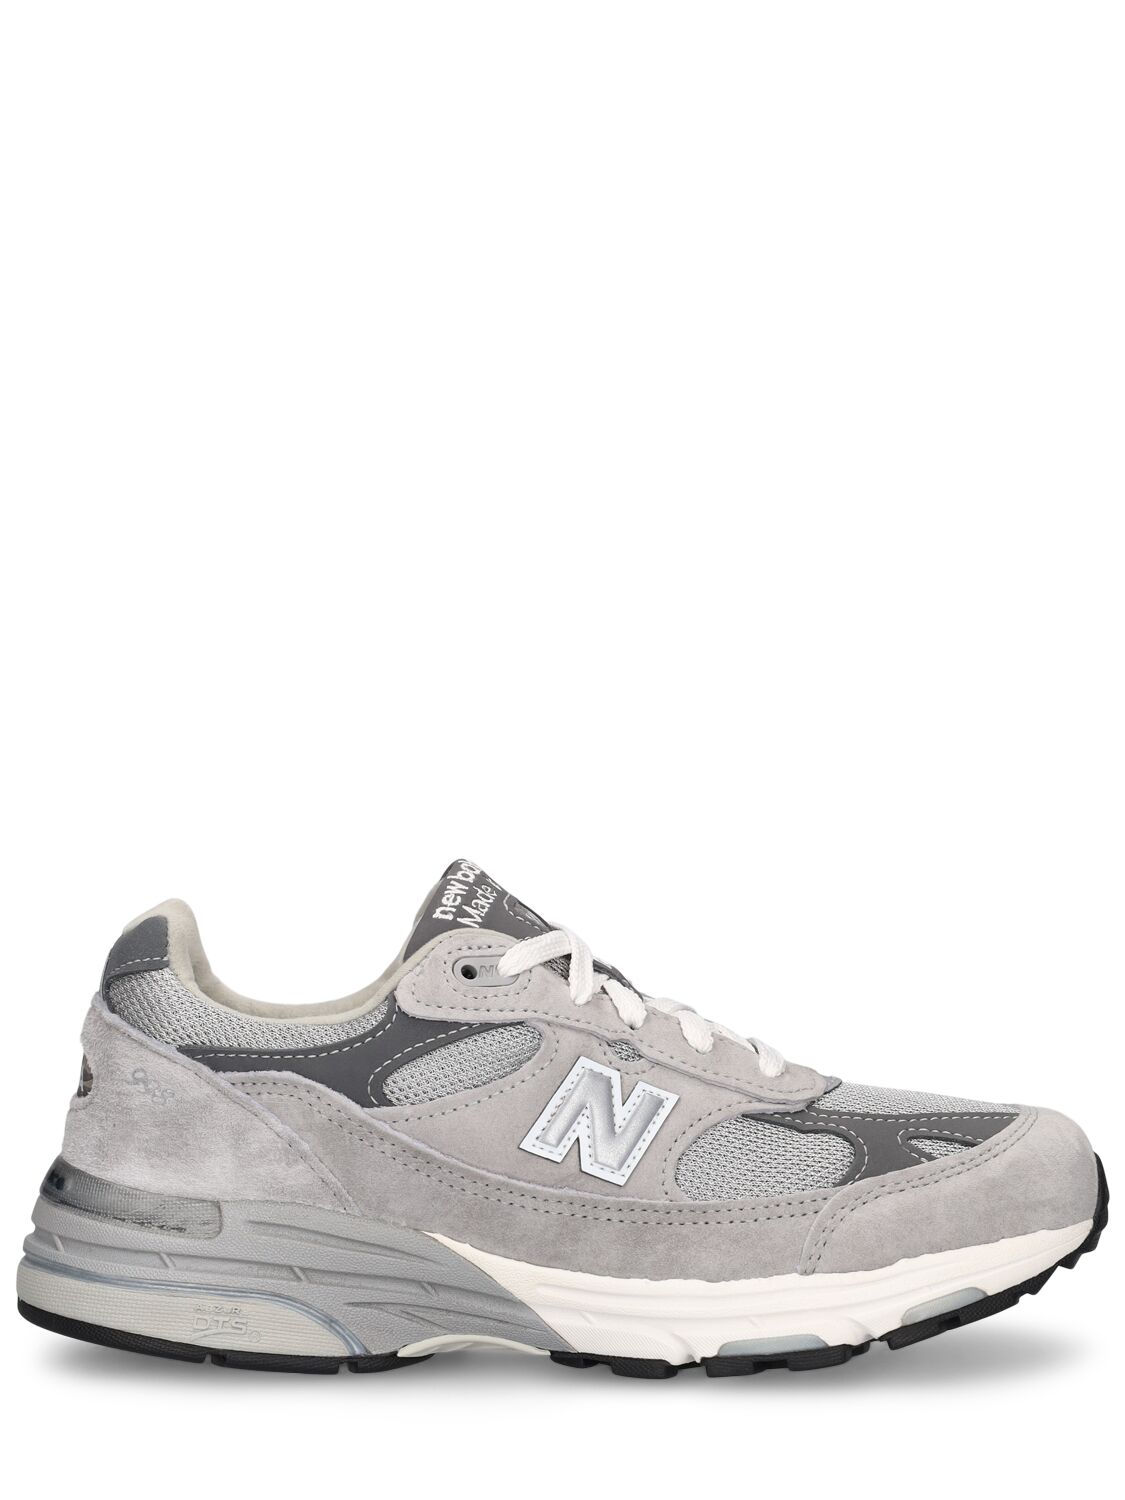 NEW BALANCE 993 V4 MADE IN USA SNEAKERS